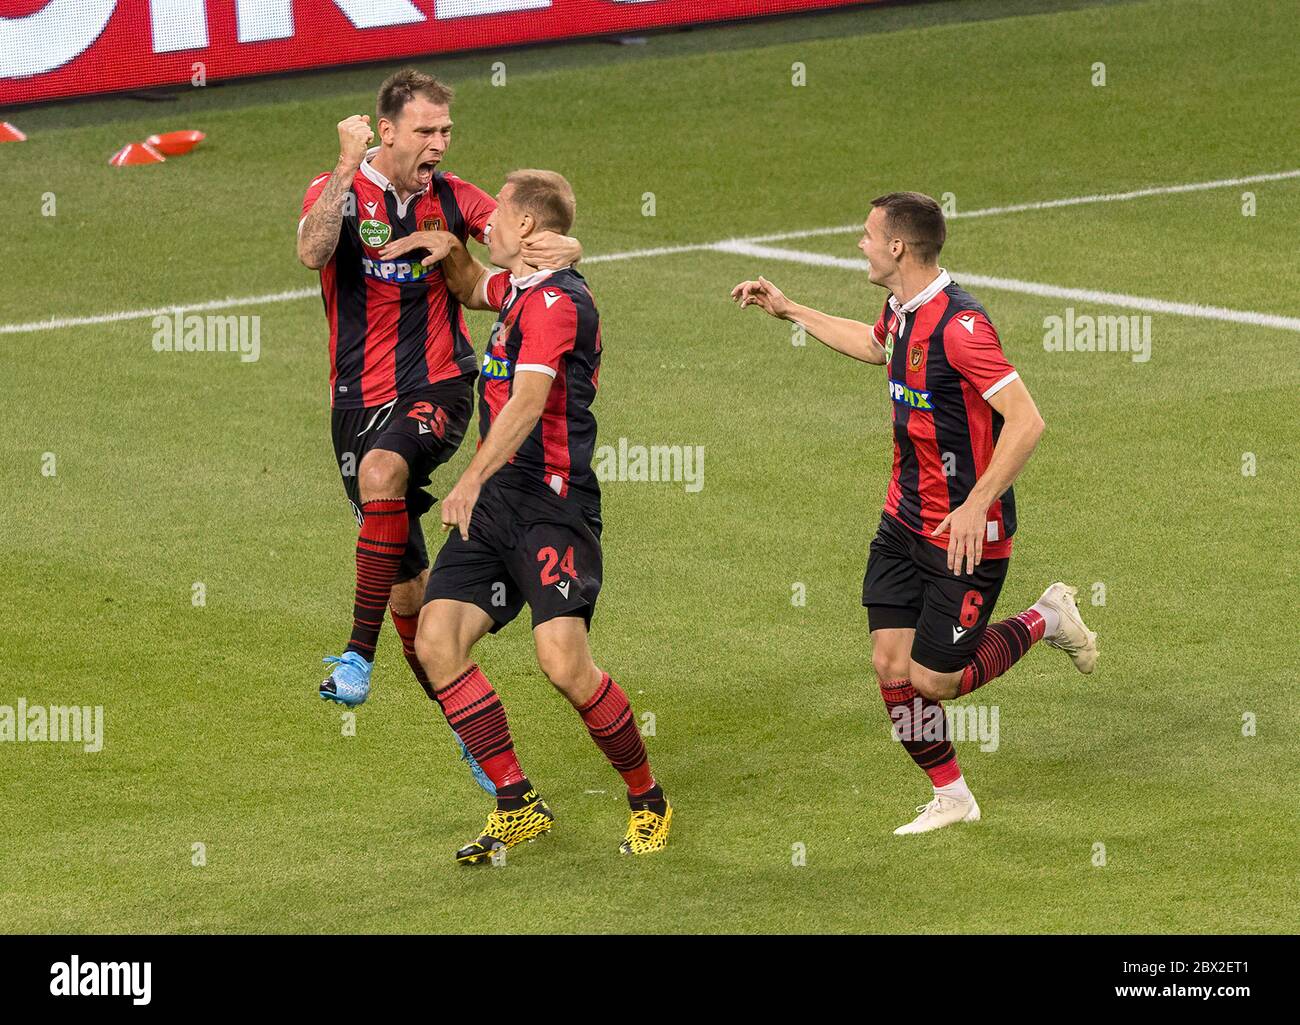 BUDAPEST, HUNGARY - JUNE 3: Ivan Lovric of Budapest Honved celebrates his goal with Djordje Kamber of Budapest Honved and Daniel Gazdag of Budapest Honved during the Hungarian Cup Final match between Budapest Honved and Mezokovesd Zsory FC at Puskas Arena on June 3, 2020 in Budapest, Hungary. Stock Photo